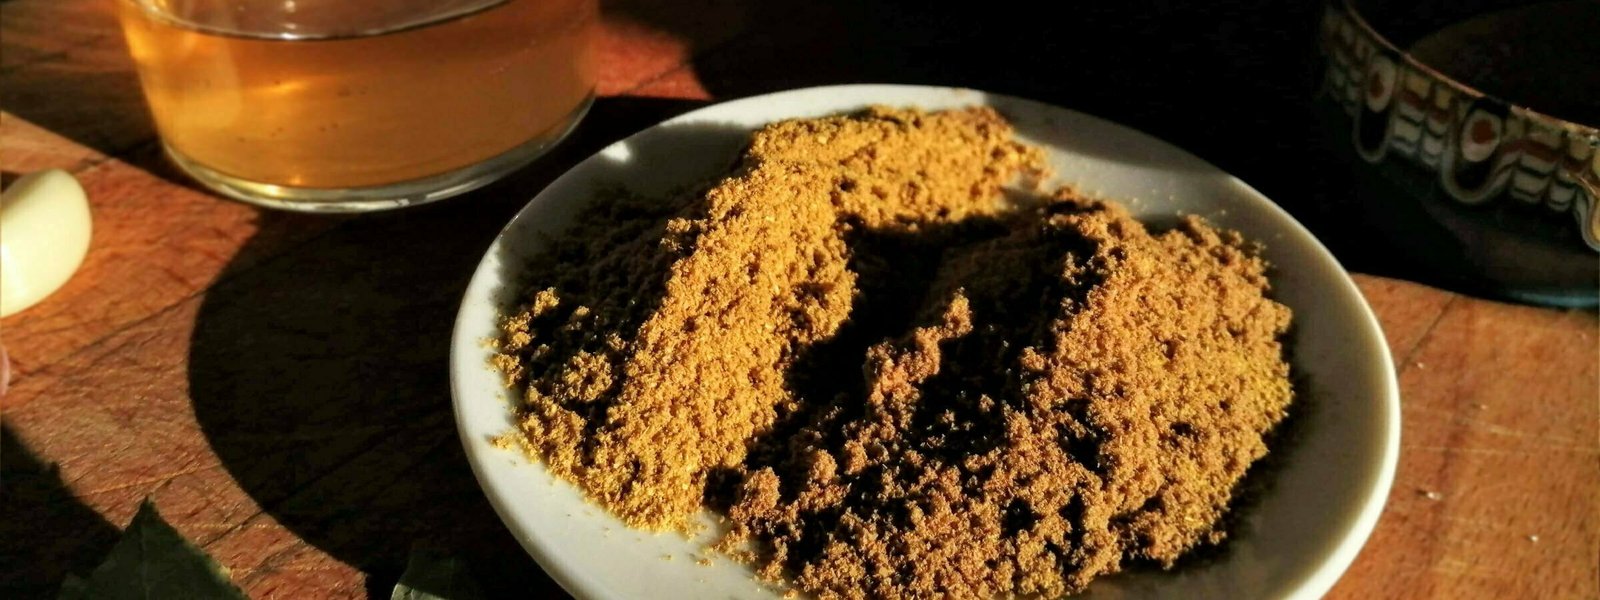 A plate of Ground corriander spice sits on a kitchen worktop with a small glass of olive oil sitting in the background